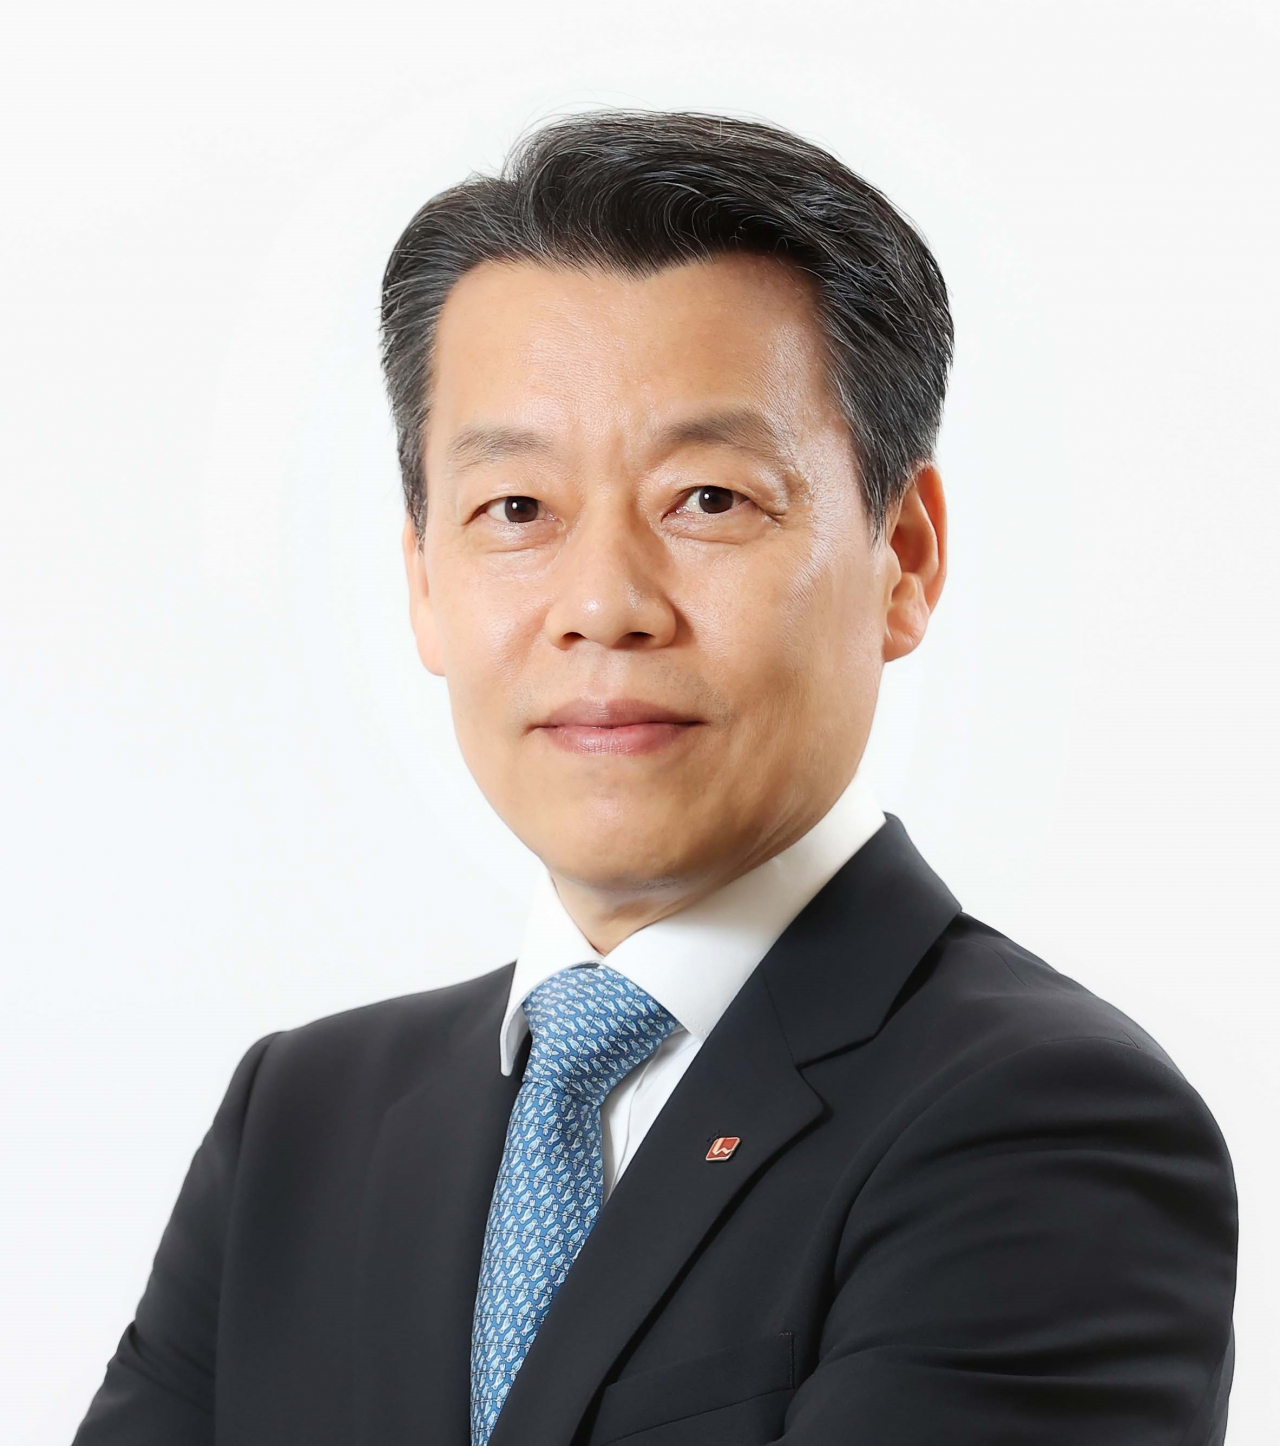 LX Holdings' new President Roh Jin-seo (LX Holdings)